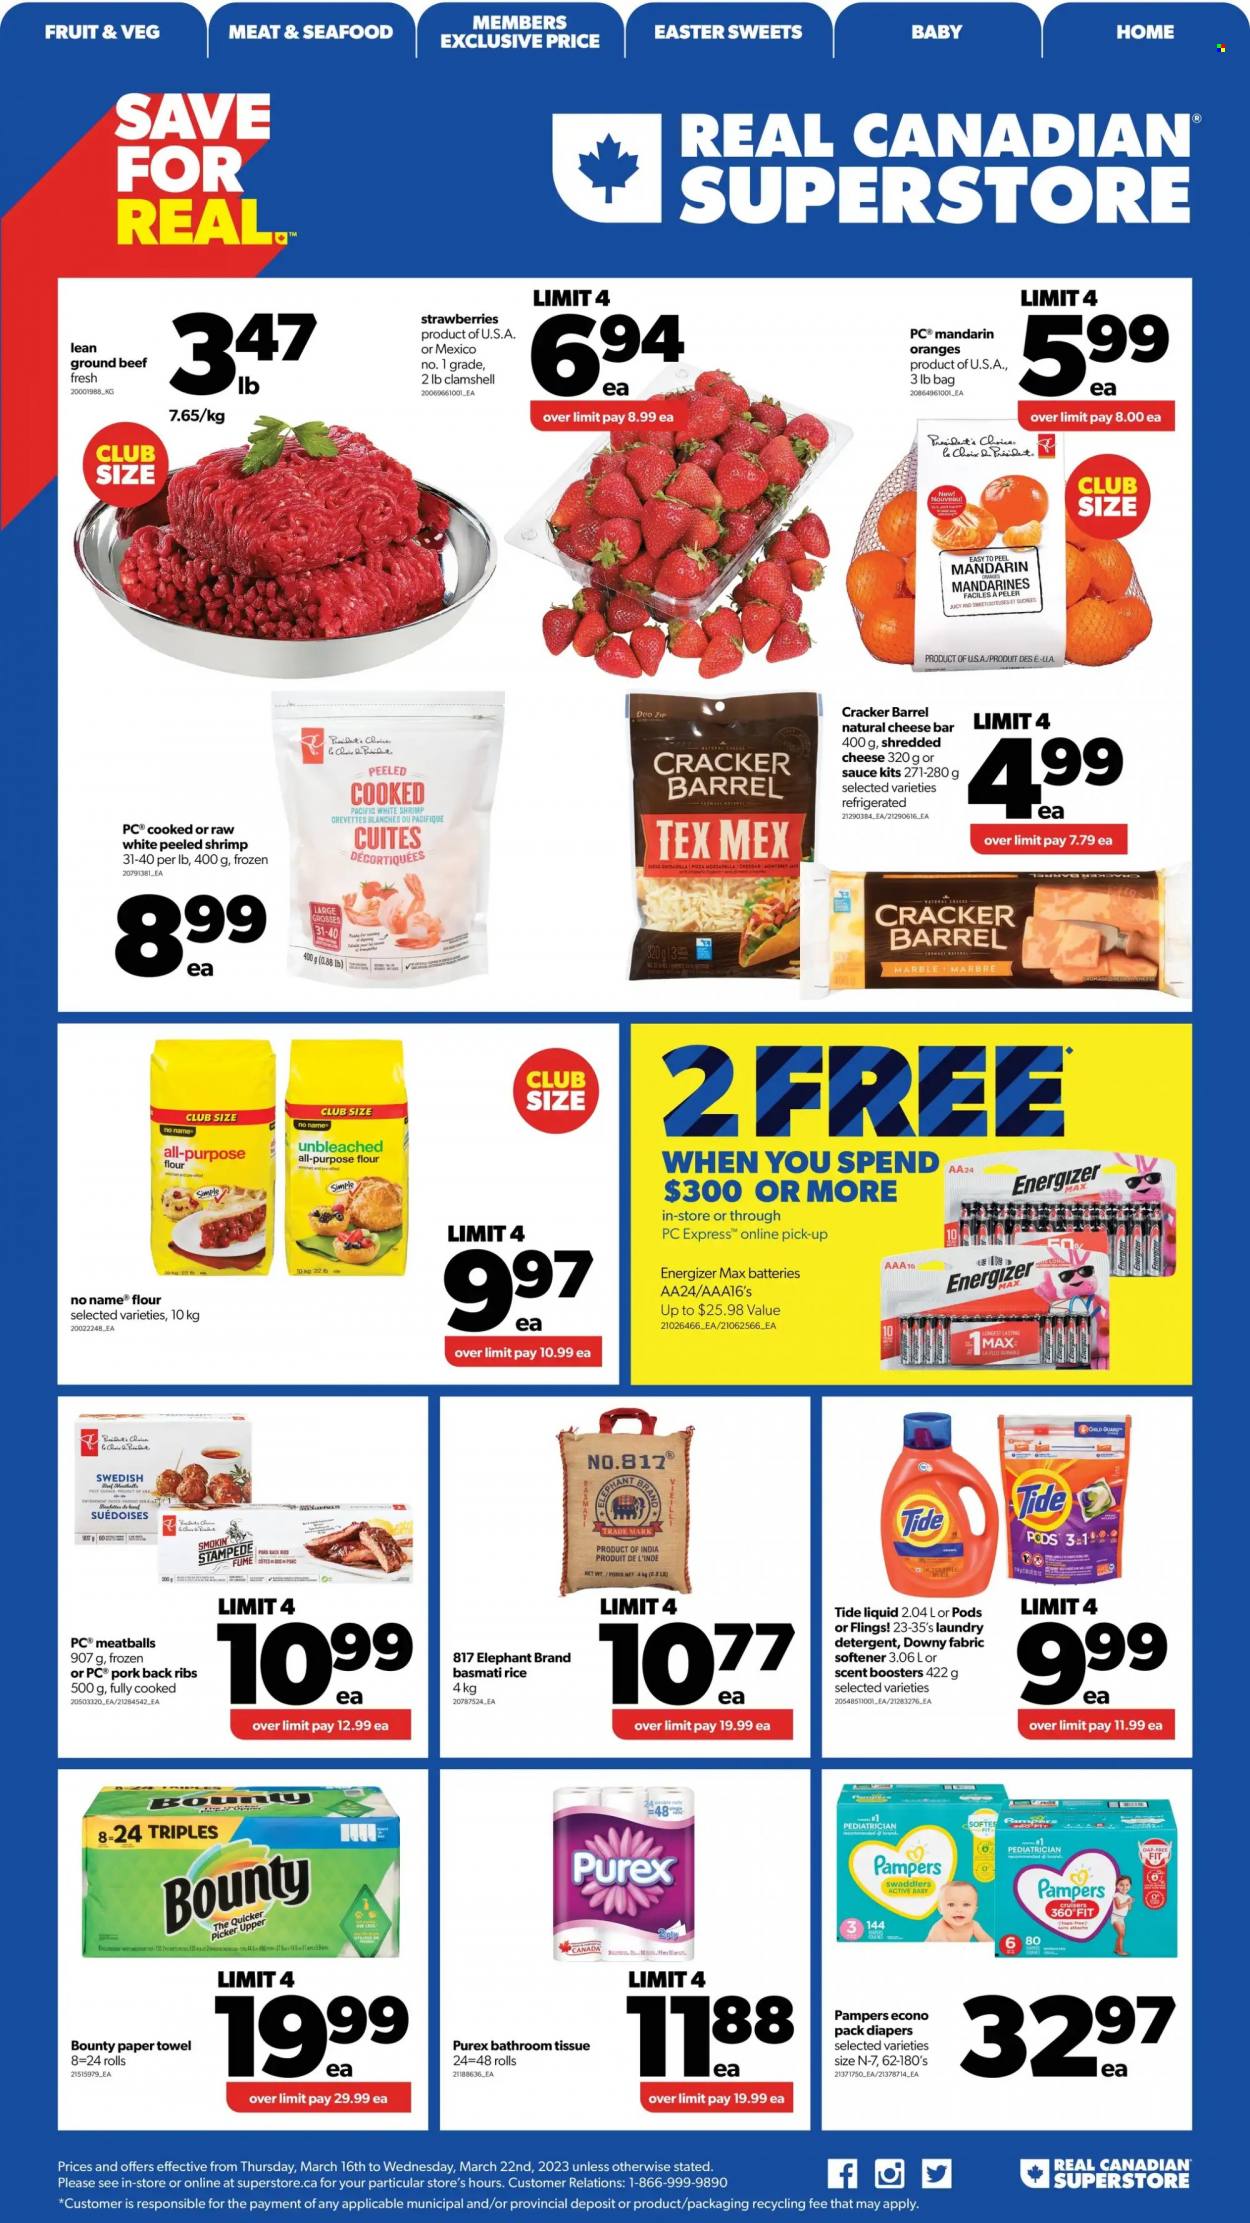 thumbnail - Real Canadian Superstore Flyer - March 16, 2023 - March 22, 2023 - Sales products - mandarines, strawberries, oranges, seafood, No Name, meatballs, shredded cheese, Président, Bounty, crackers, flour, basmati rice, rice, L'Or, beef meat, ground beef, ribs, pork meat, pork ribs, pork back ribs, Pampers, nappies, bath tissue, paper towels, Tide, fabric softener, laundry detergent, scent booster, Purex, Downy Laundry, battery, detergent, Energizer, deodorant. Page 1.